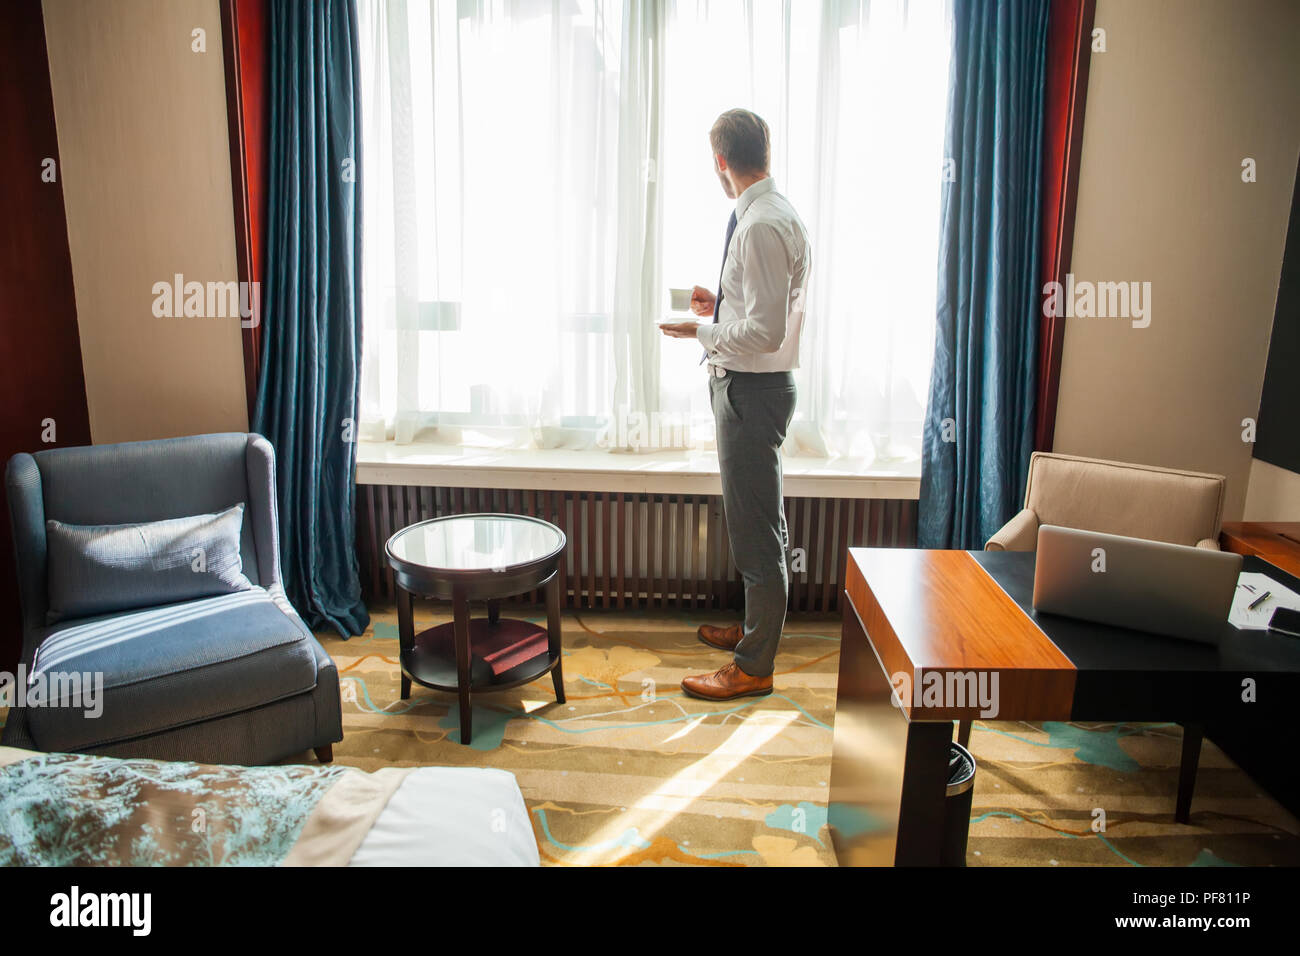 business trip and people concept - businessman drinking coffee at hotel room. Stock Photo